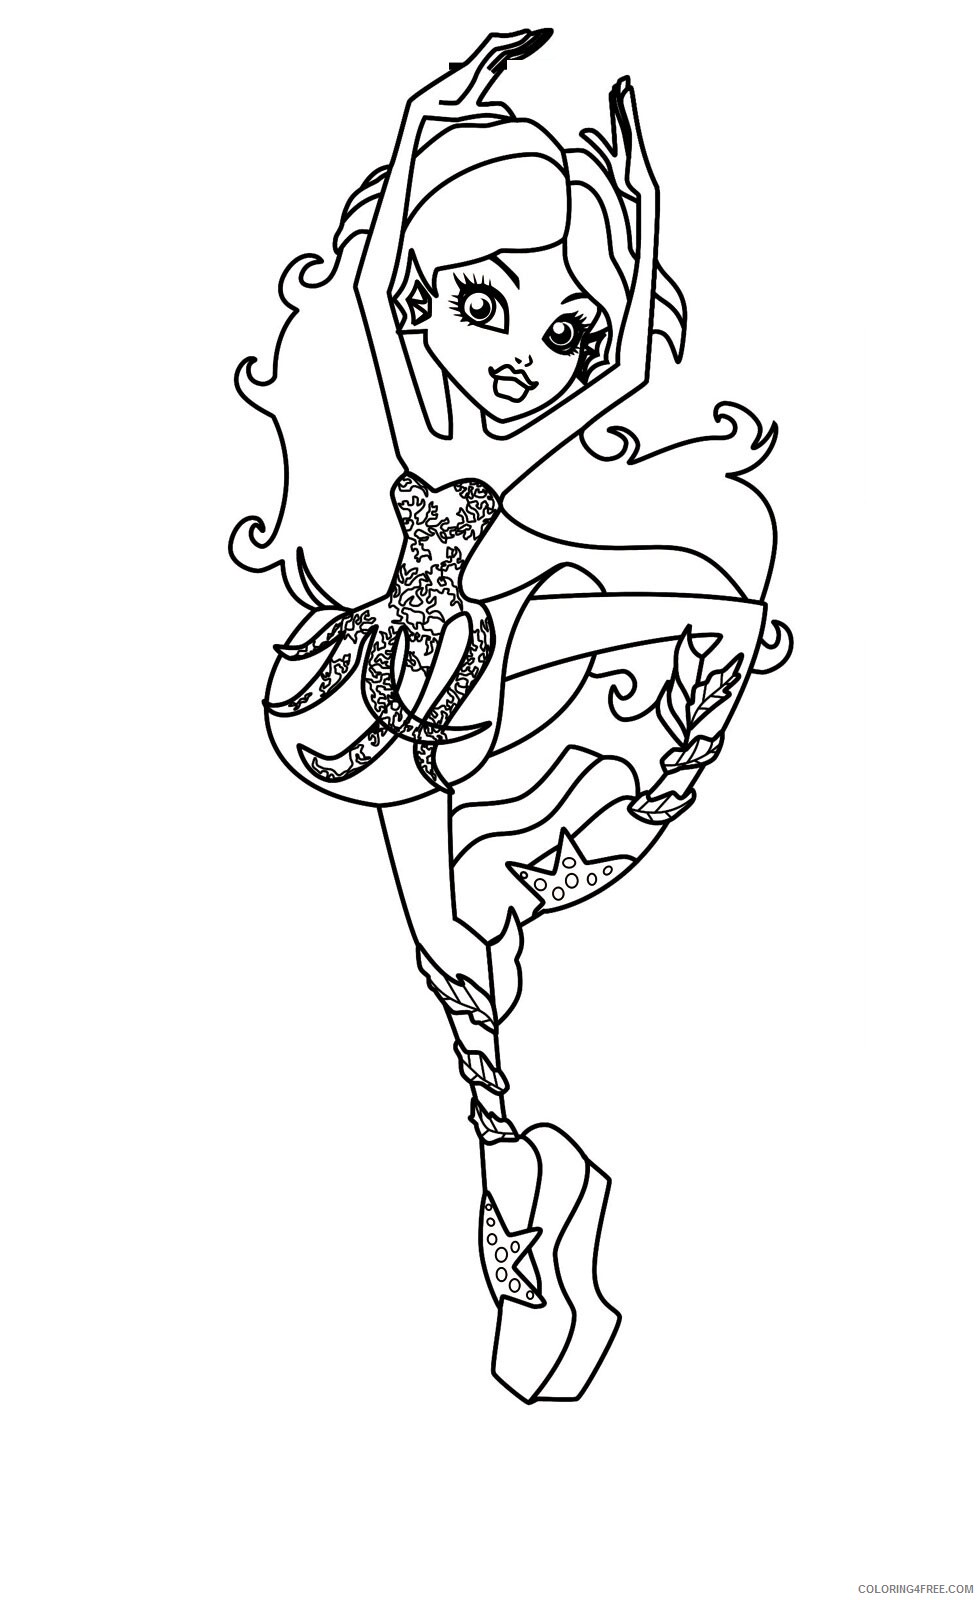 Monster High Coloring Pages For Monster High Printable 2021 4151 Coloring4free